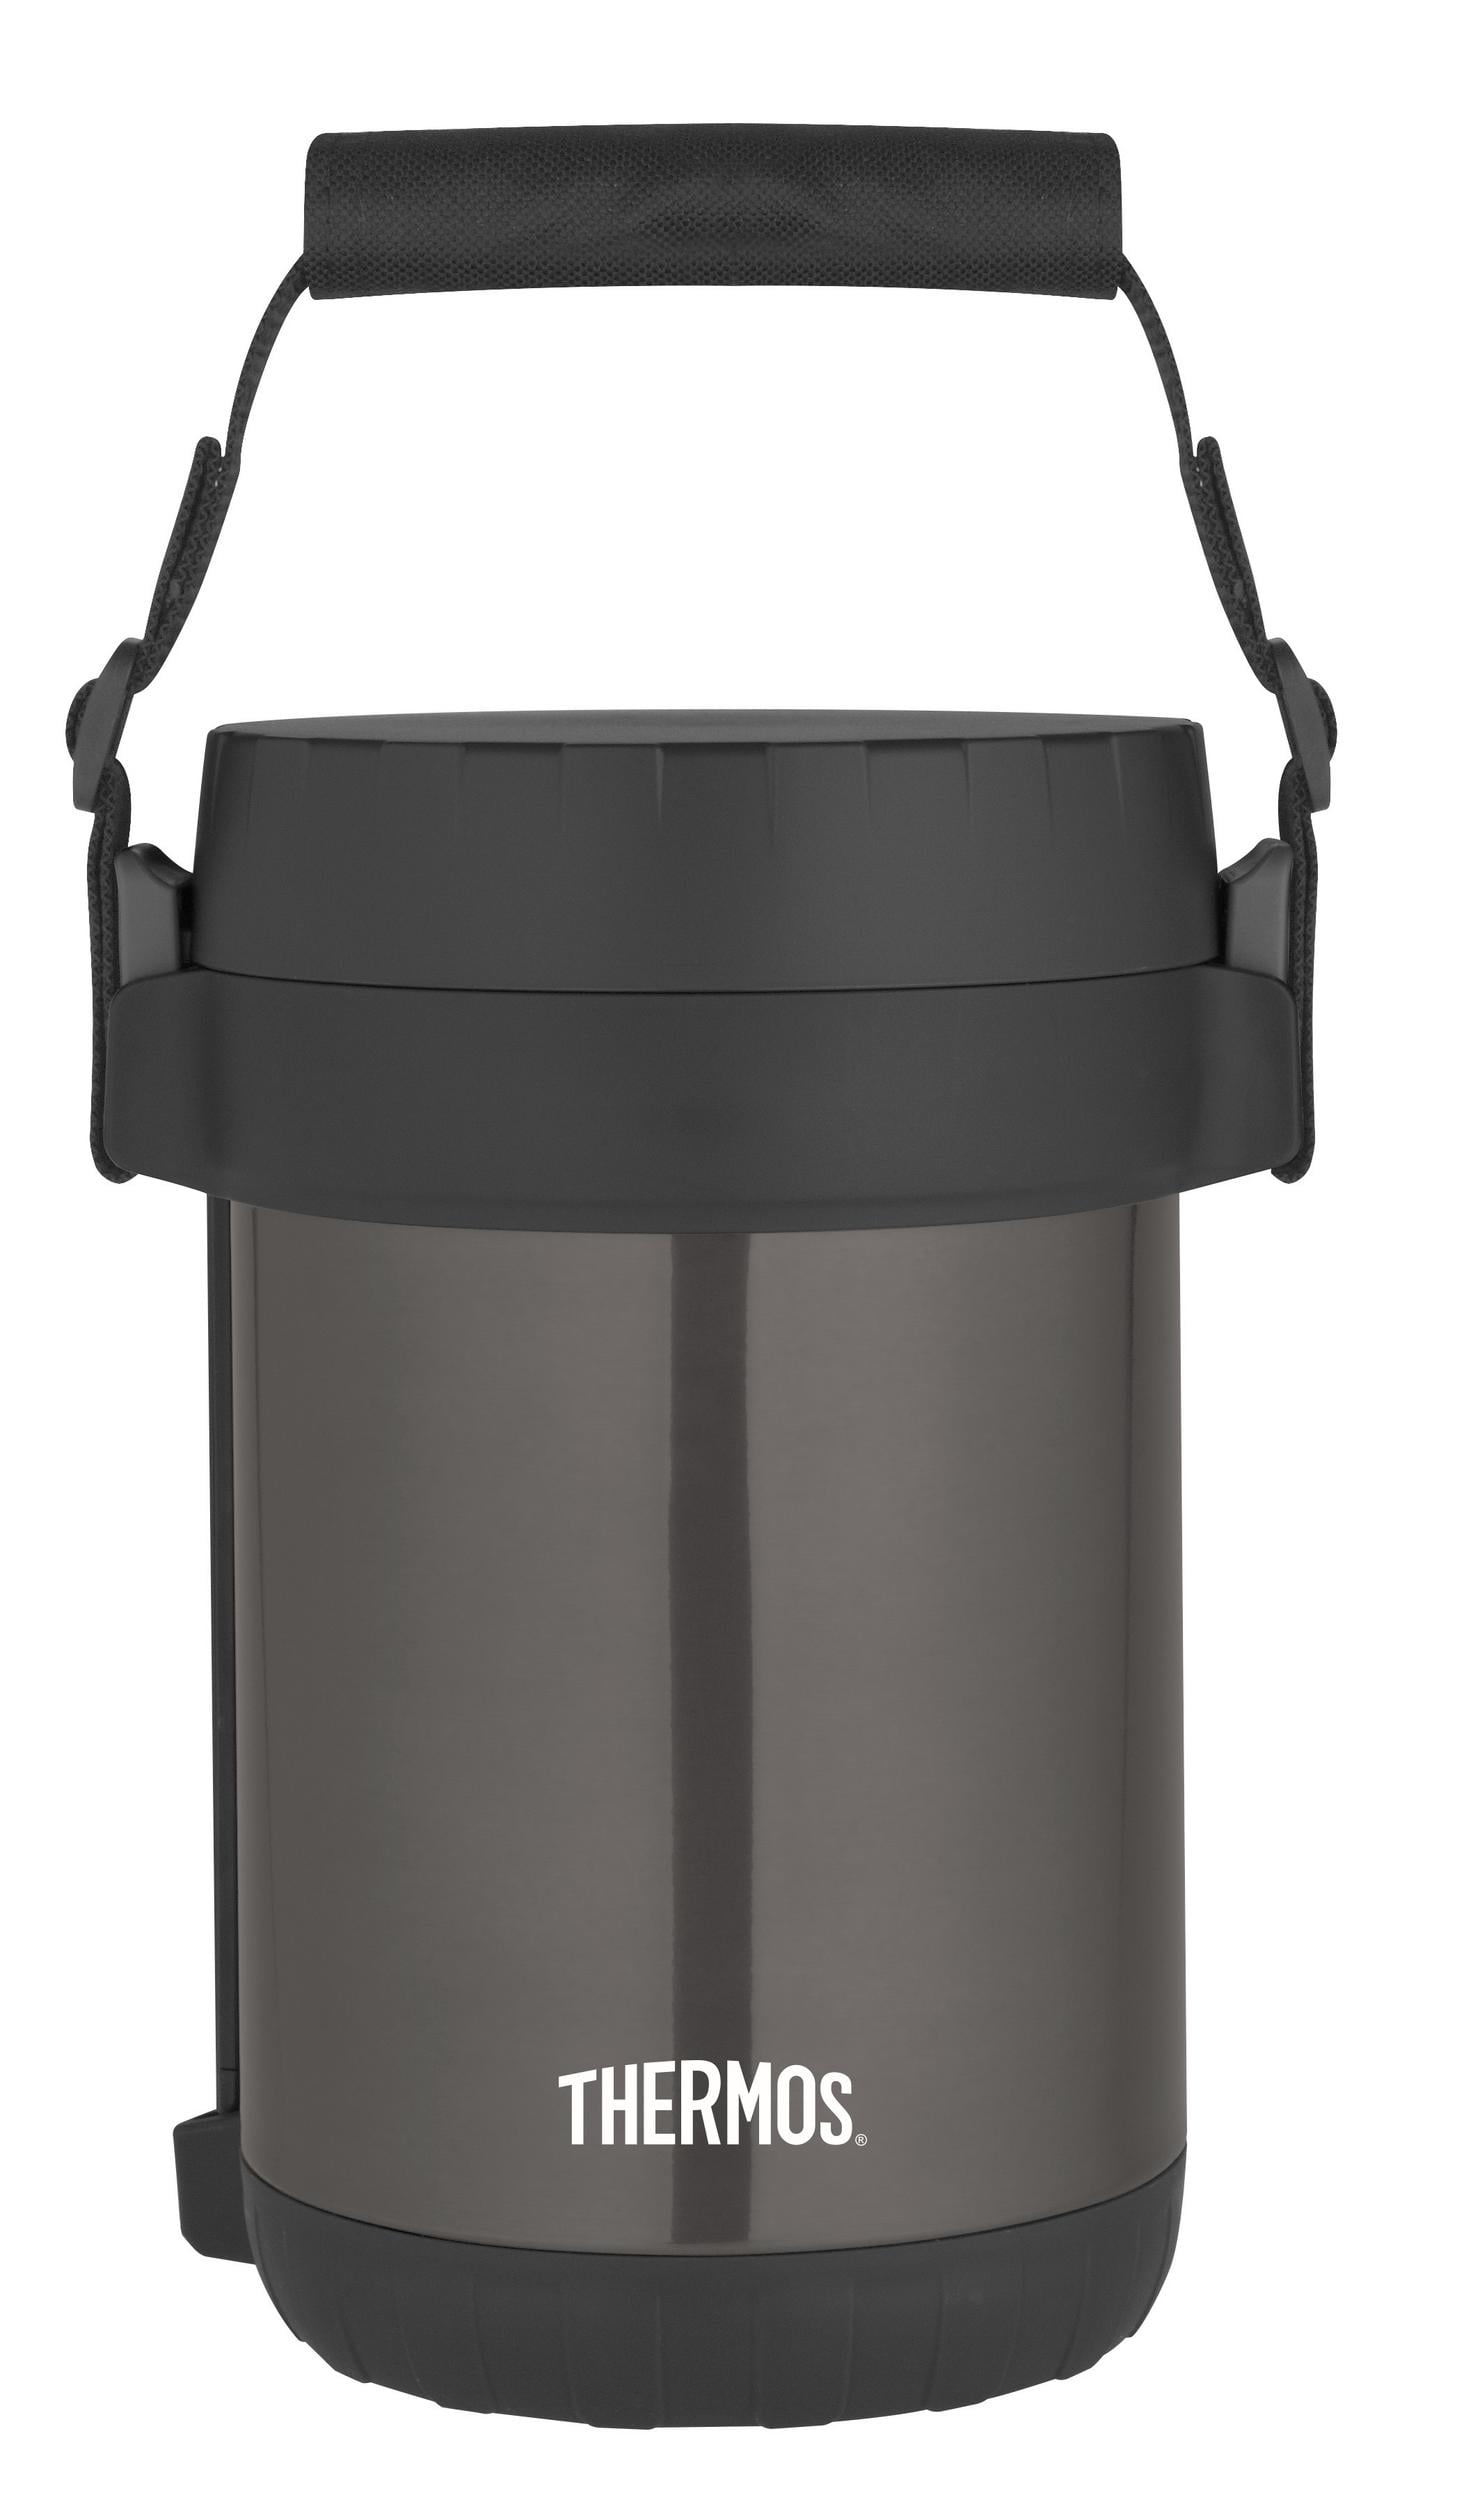 Thermos JBG1800SM4 Vacuum-Insulated All-in-1 Meal Carrier & Food Warmer 